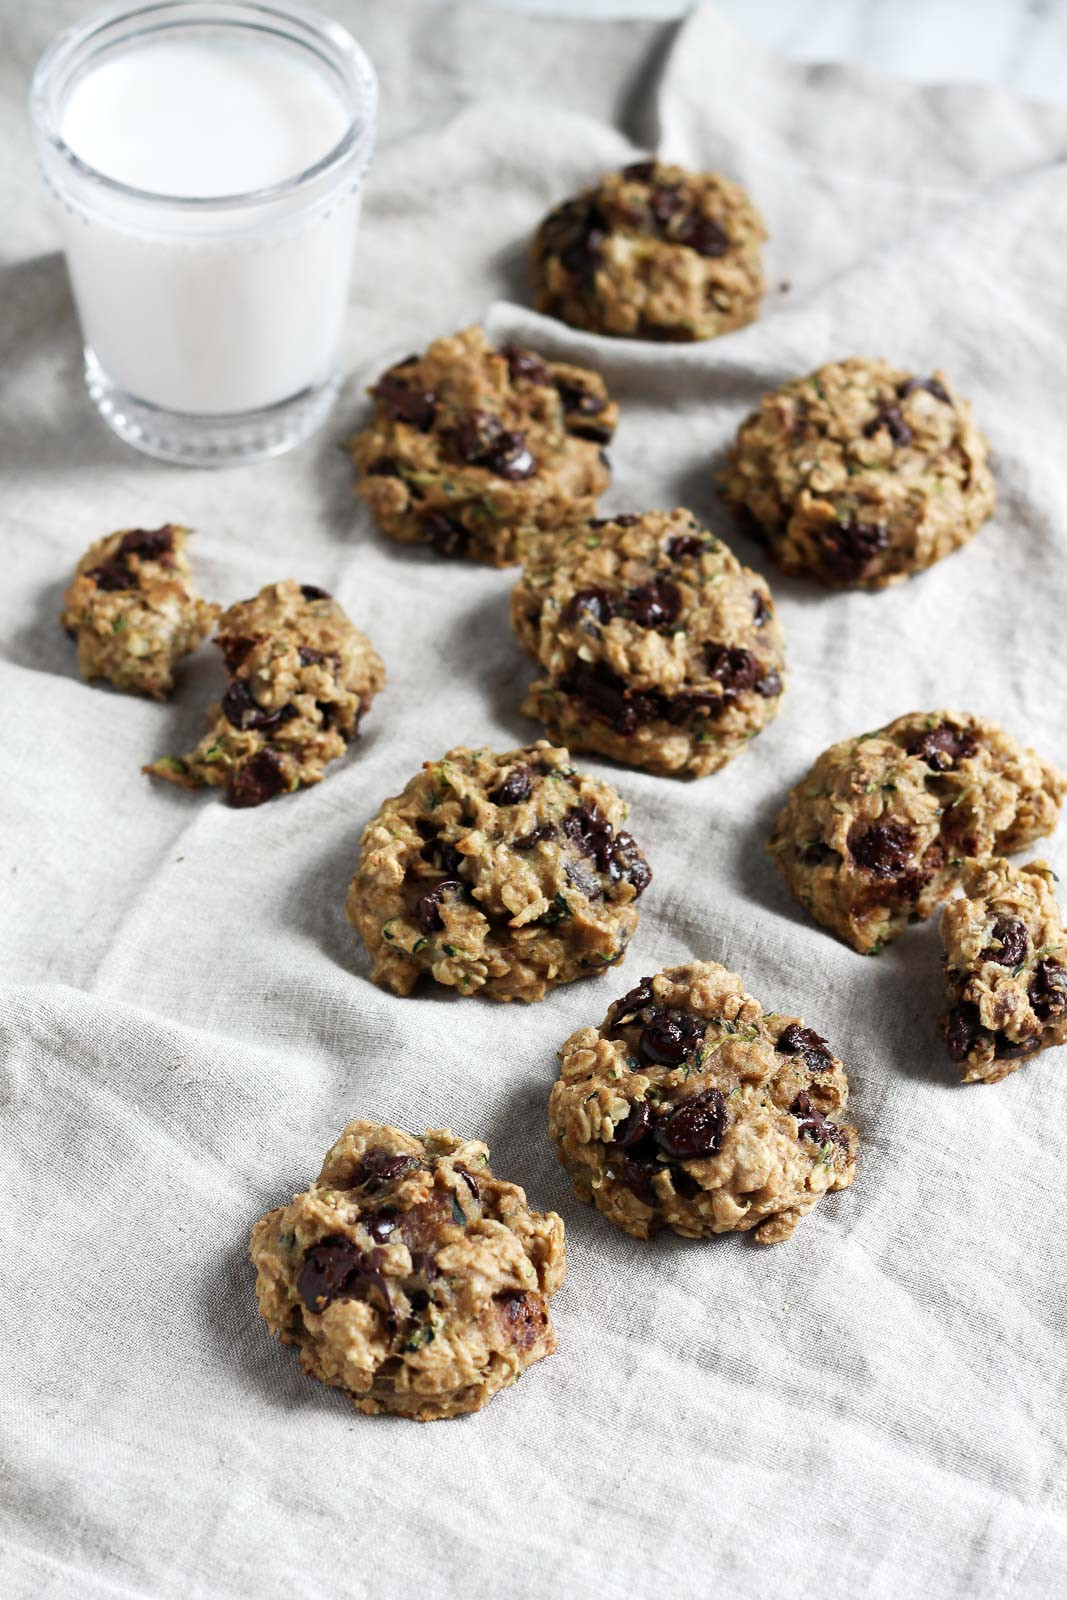 Oatmeal Chocolate Chip Cookies Healthy
 Healthy Chocolate Chip Zucchini Oatmeal Cookies